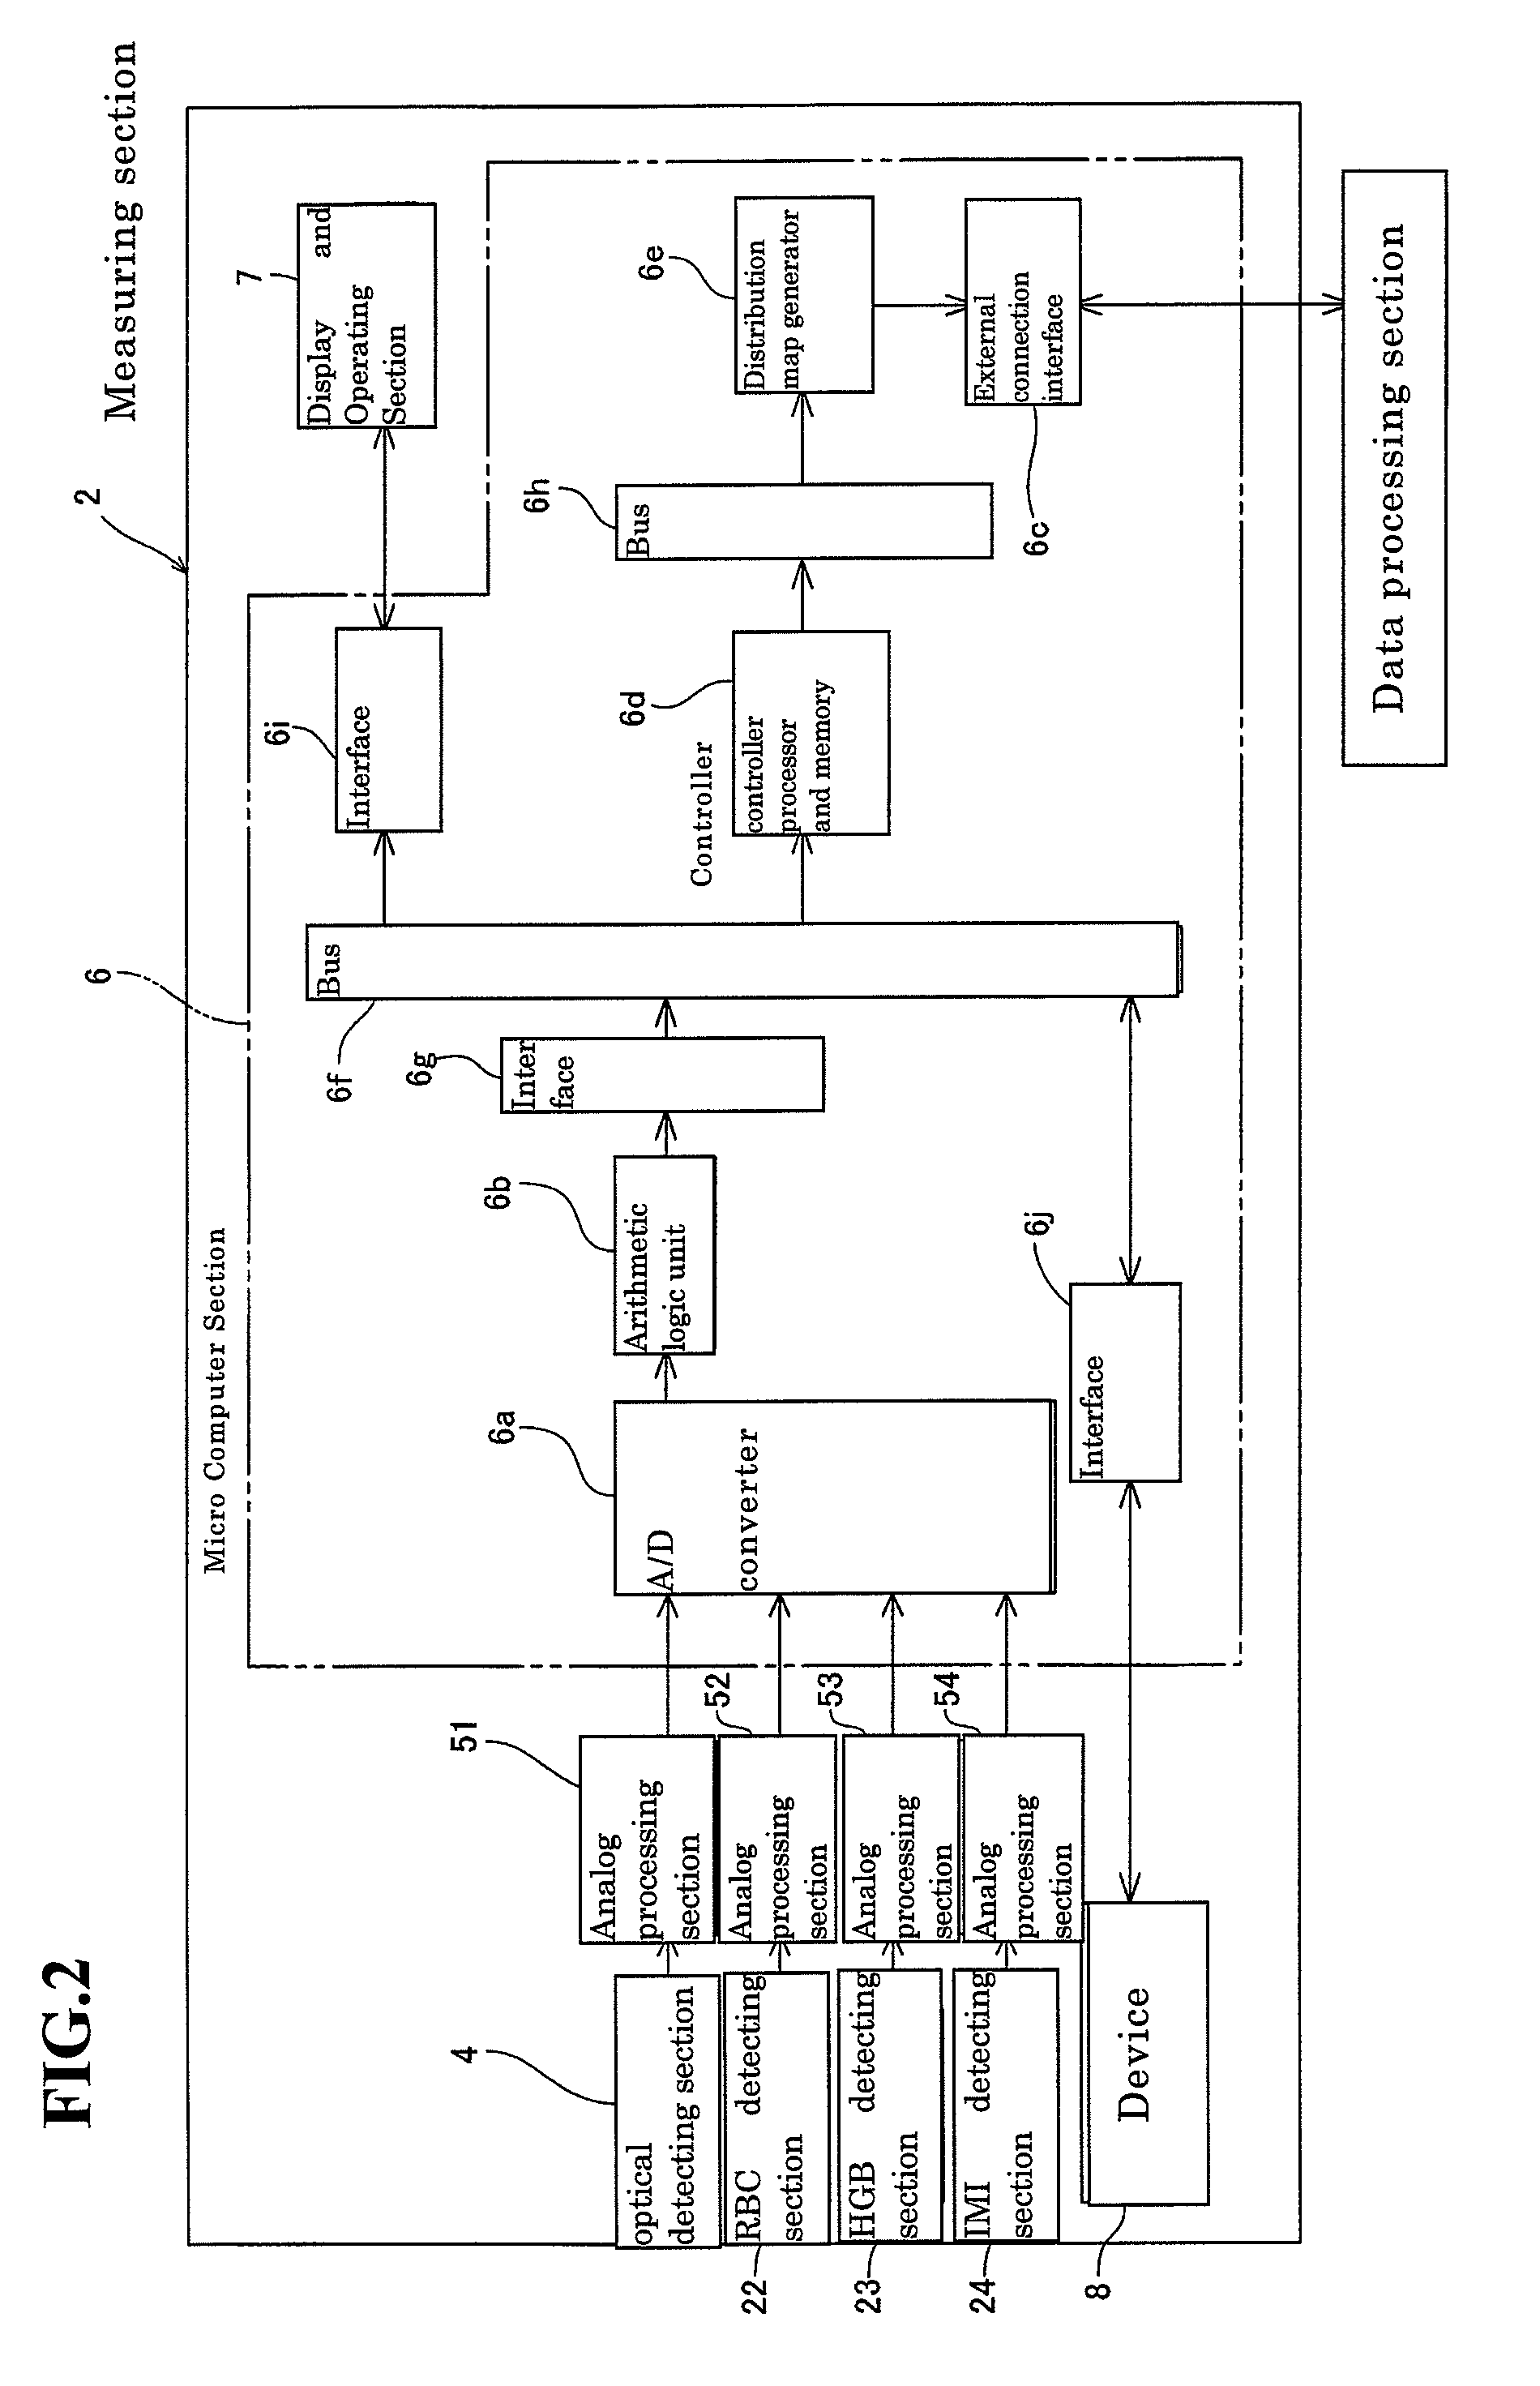 Diagnosis assisting system, diagnosis assisting information providing device and computer program product